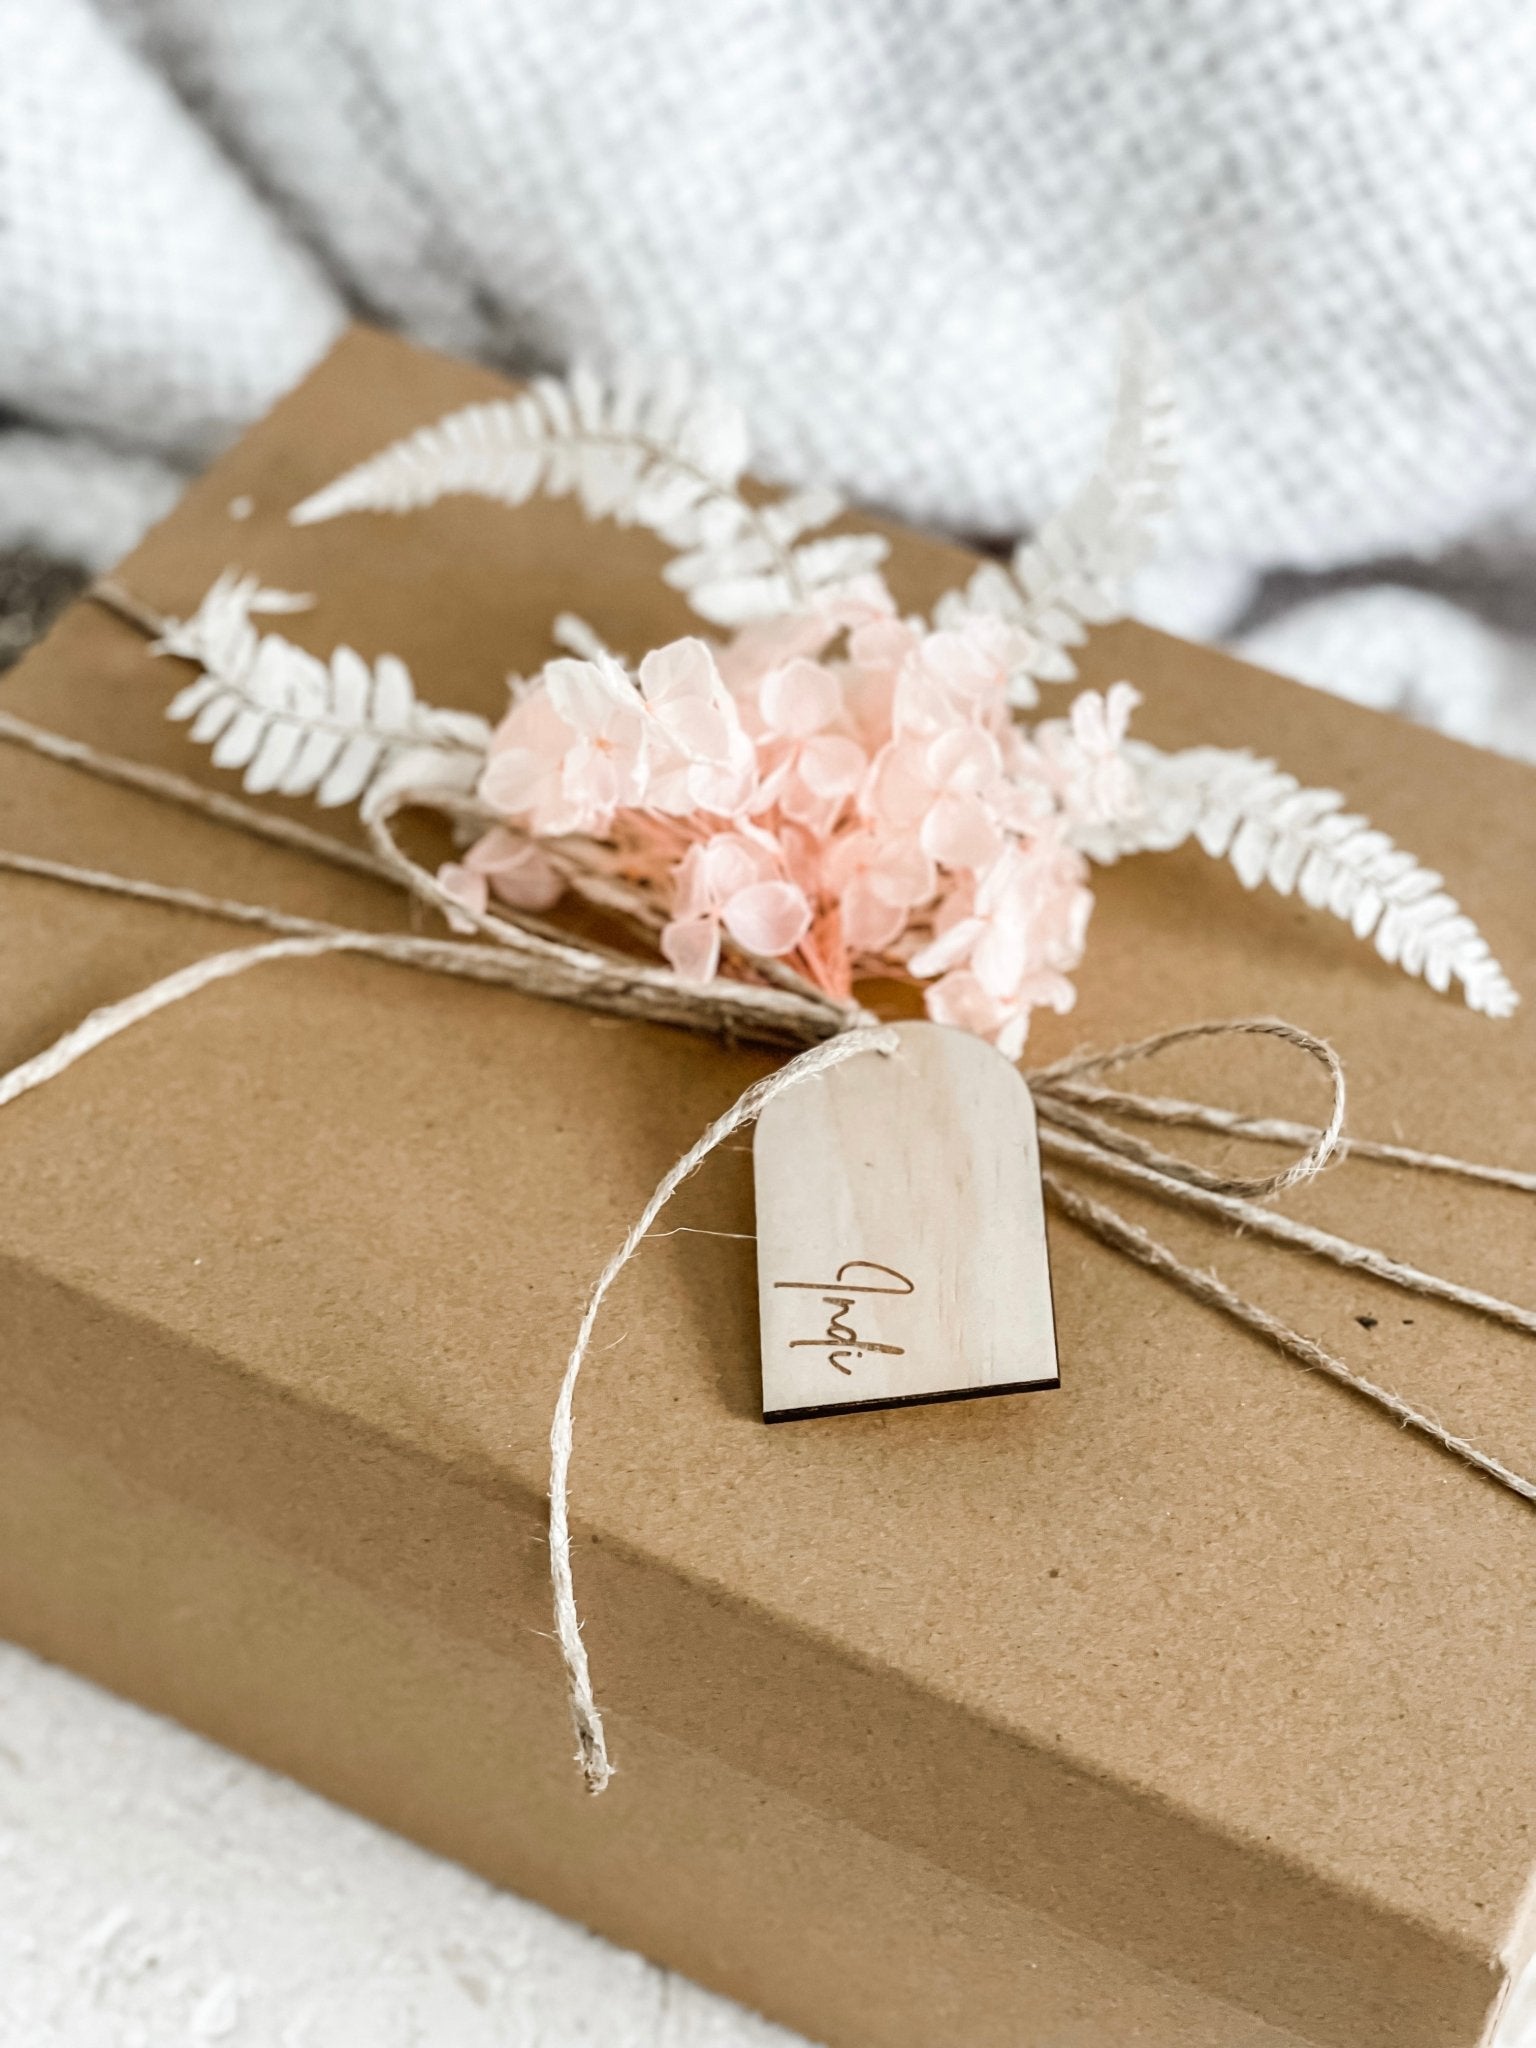 Wooden Arched Gift Tag - The Humble Gift Co.